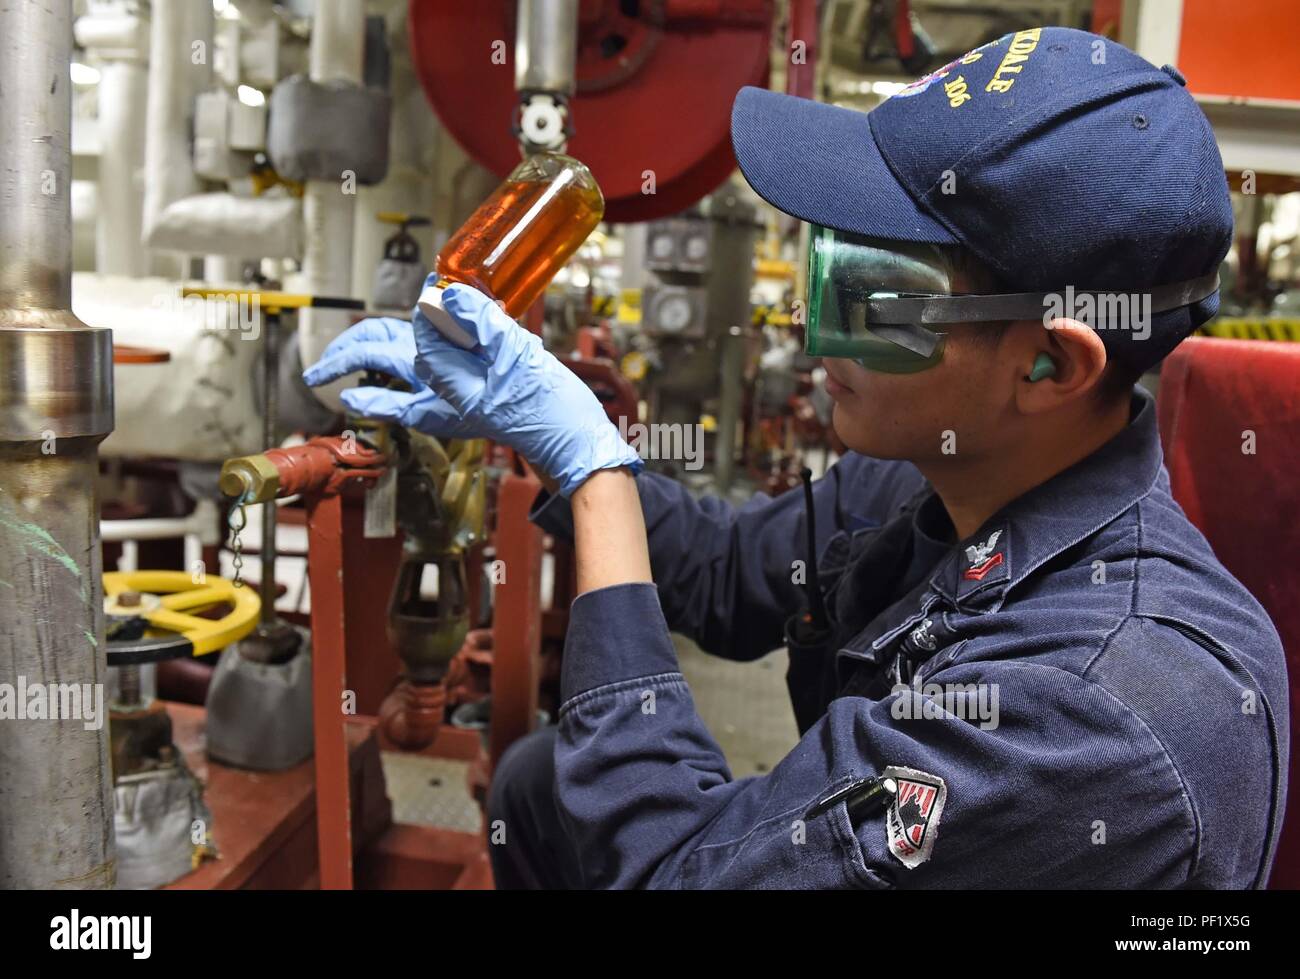 160222-N-KM939-471  PHILIPPINE SEA (Feb. 22, 2016) - Gas Turbine Systems Technician (Mechanical) 2nd Class Enrique Martinezcarballo, from Visalia, Calif., checks a sample of lube oil for contaminents aboard the guided-missile destroyer USS Stockdale (DDG 106). Providing a ready force supporting security and stability in the Indo-Asia-Pacific, Stockdale is operating as part of the John C. Stennis Strike Group and Great Green Fleet on a regularly scheduled 7th Fleet deployment. (U.S. Navy photo by Mass Communication Specialist 3rd Class David A. Cox/Released) Stock Photo